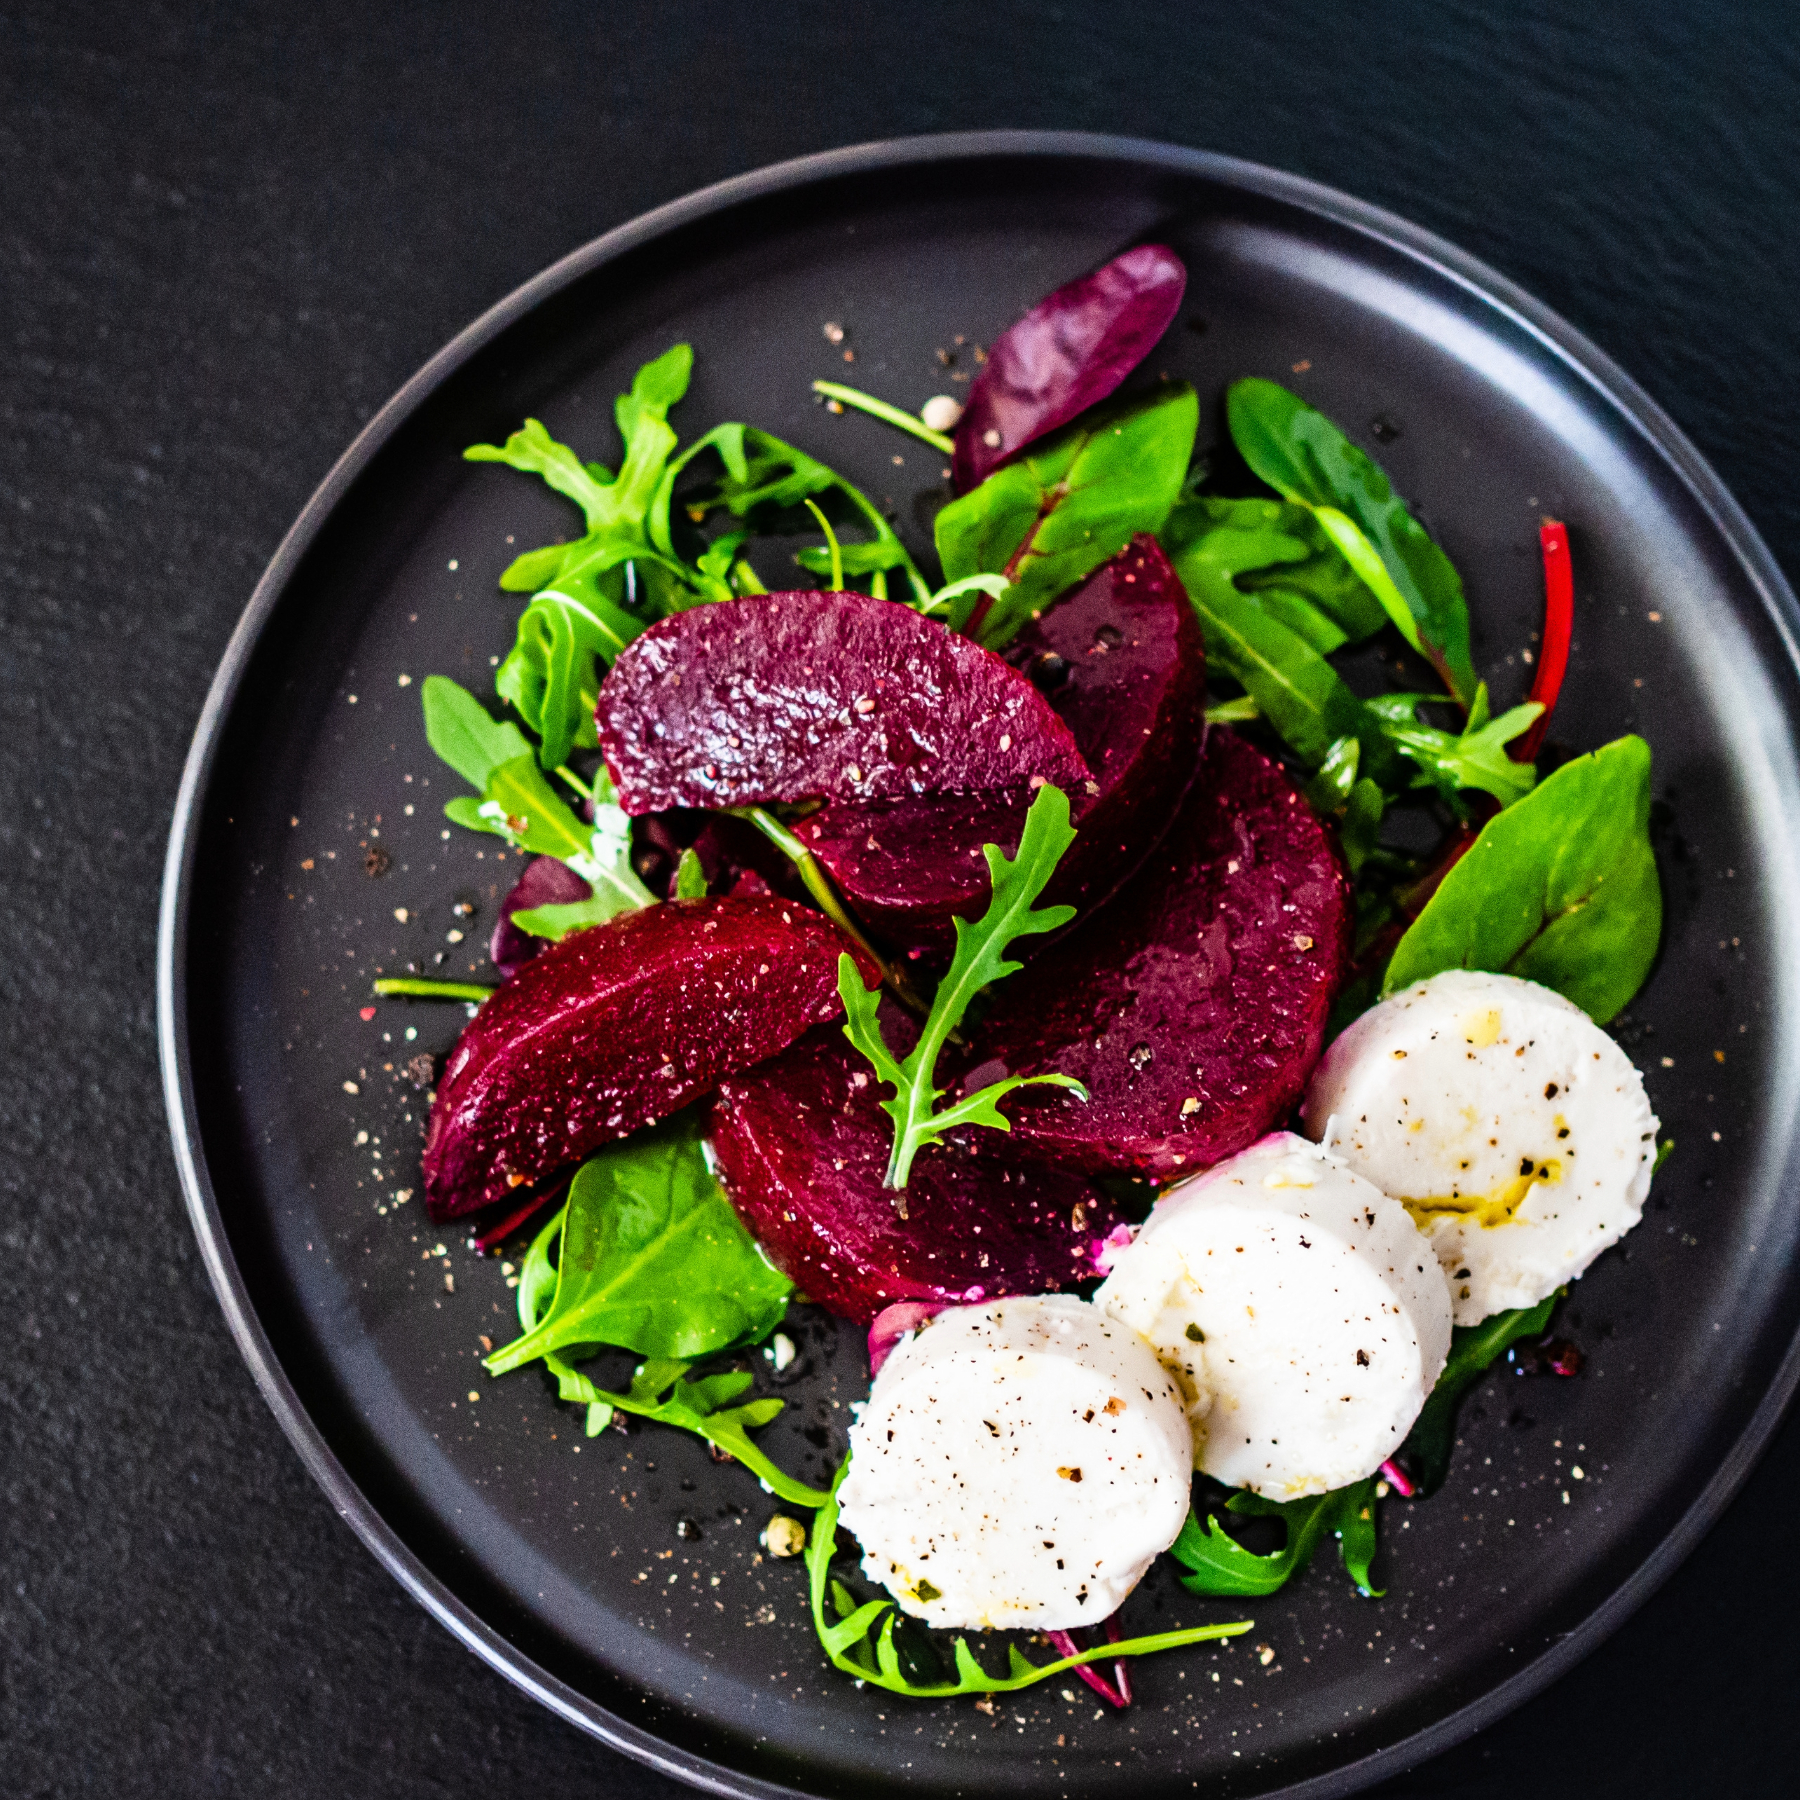 Beet and Goat Cheese Salad